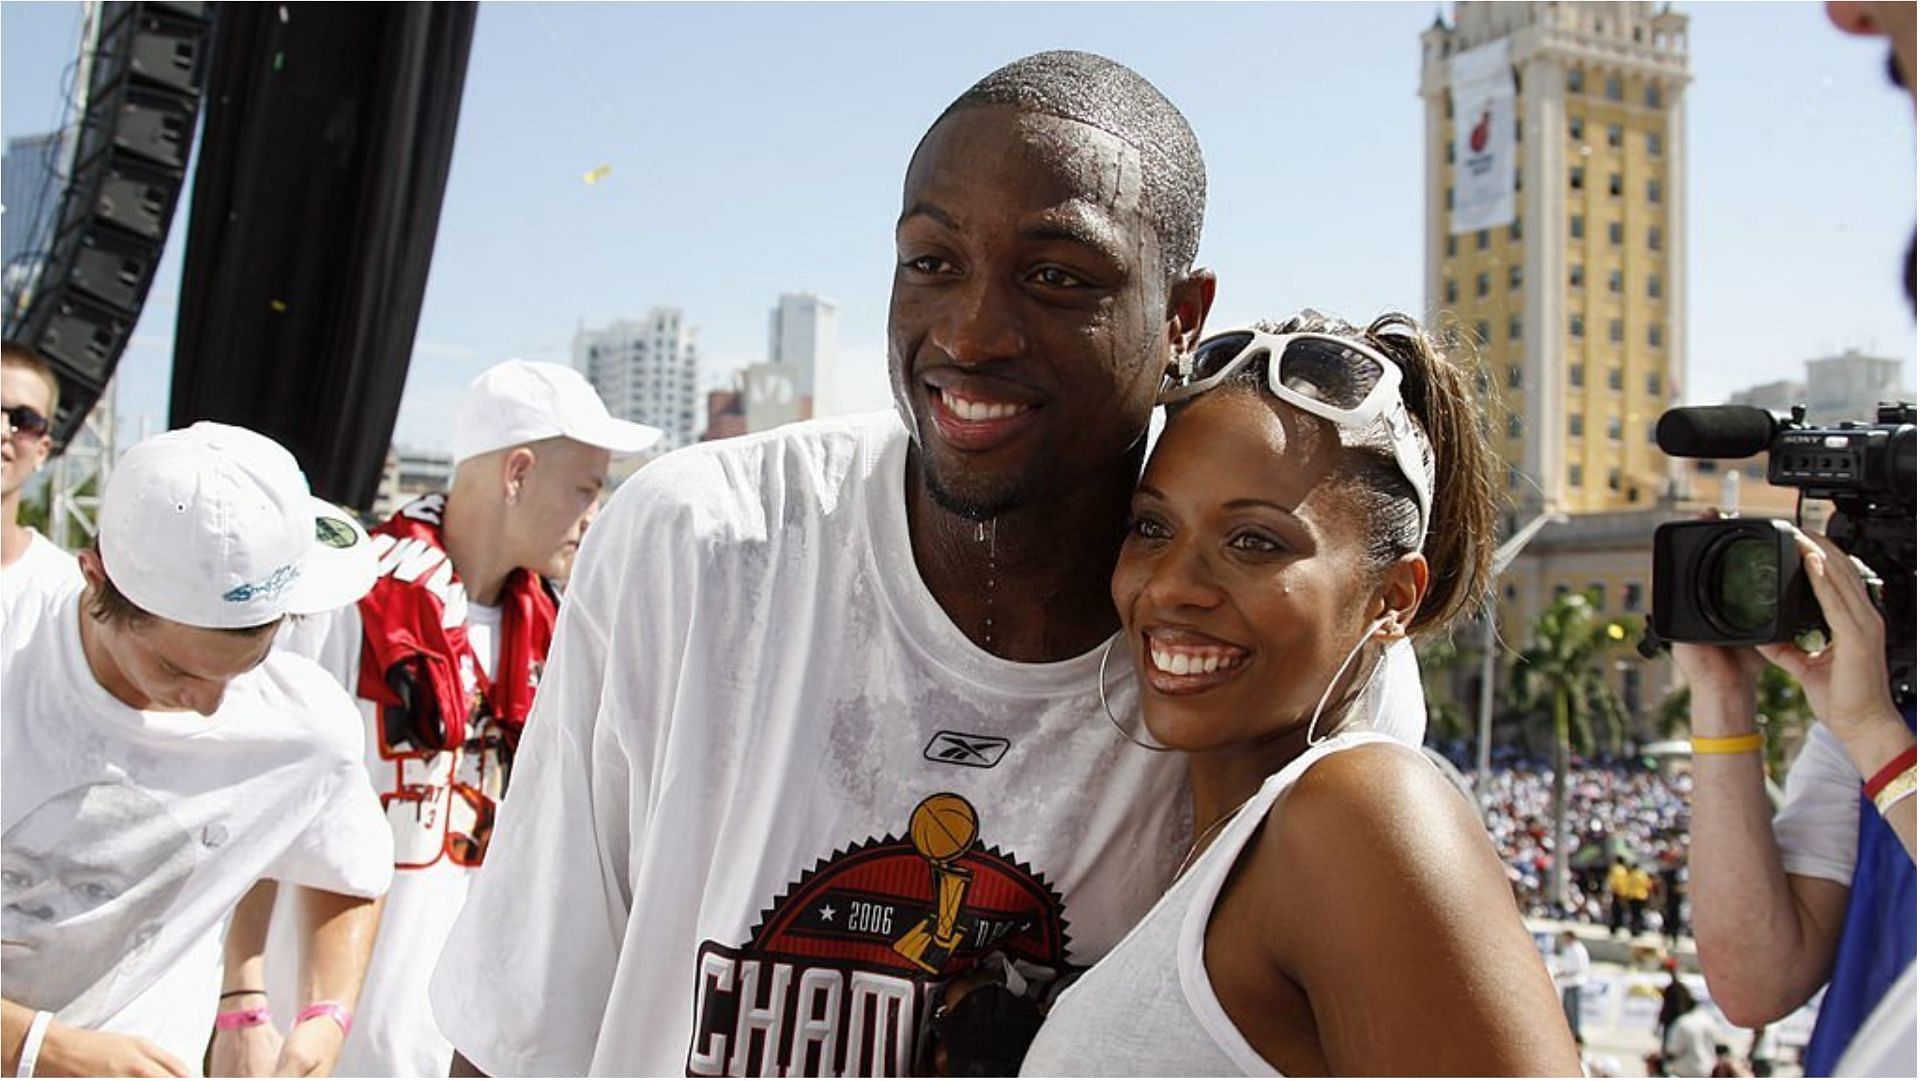 Siohvaughn Funches claimed that Dwyane Wade was trying to use her issues for his own benefits (Image via Issac Baldizon/Getty Images)